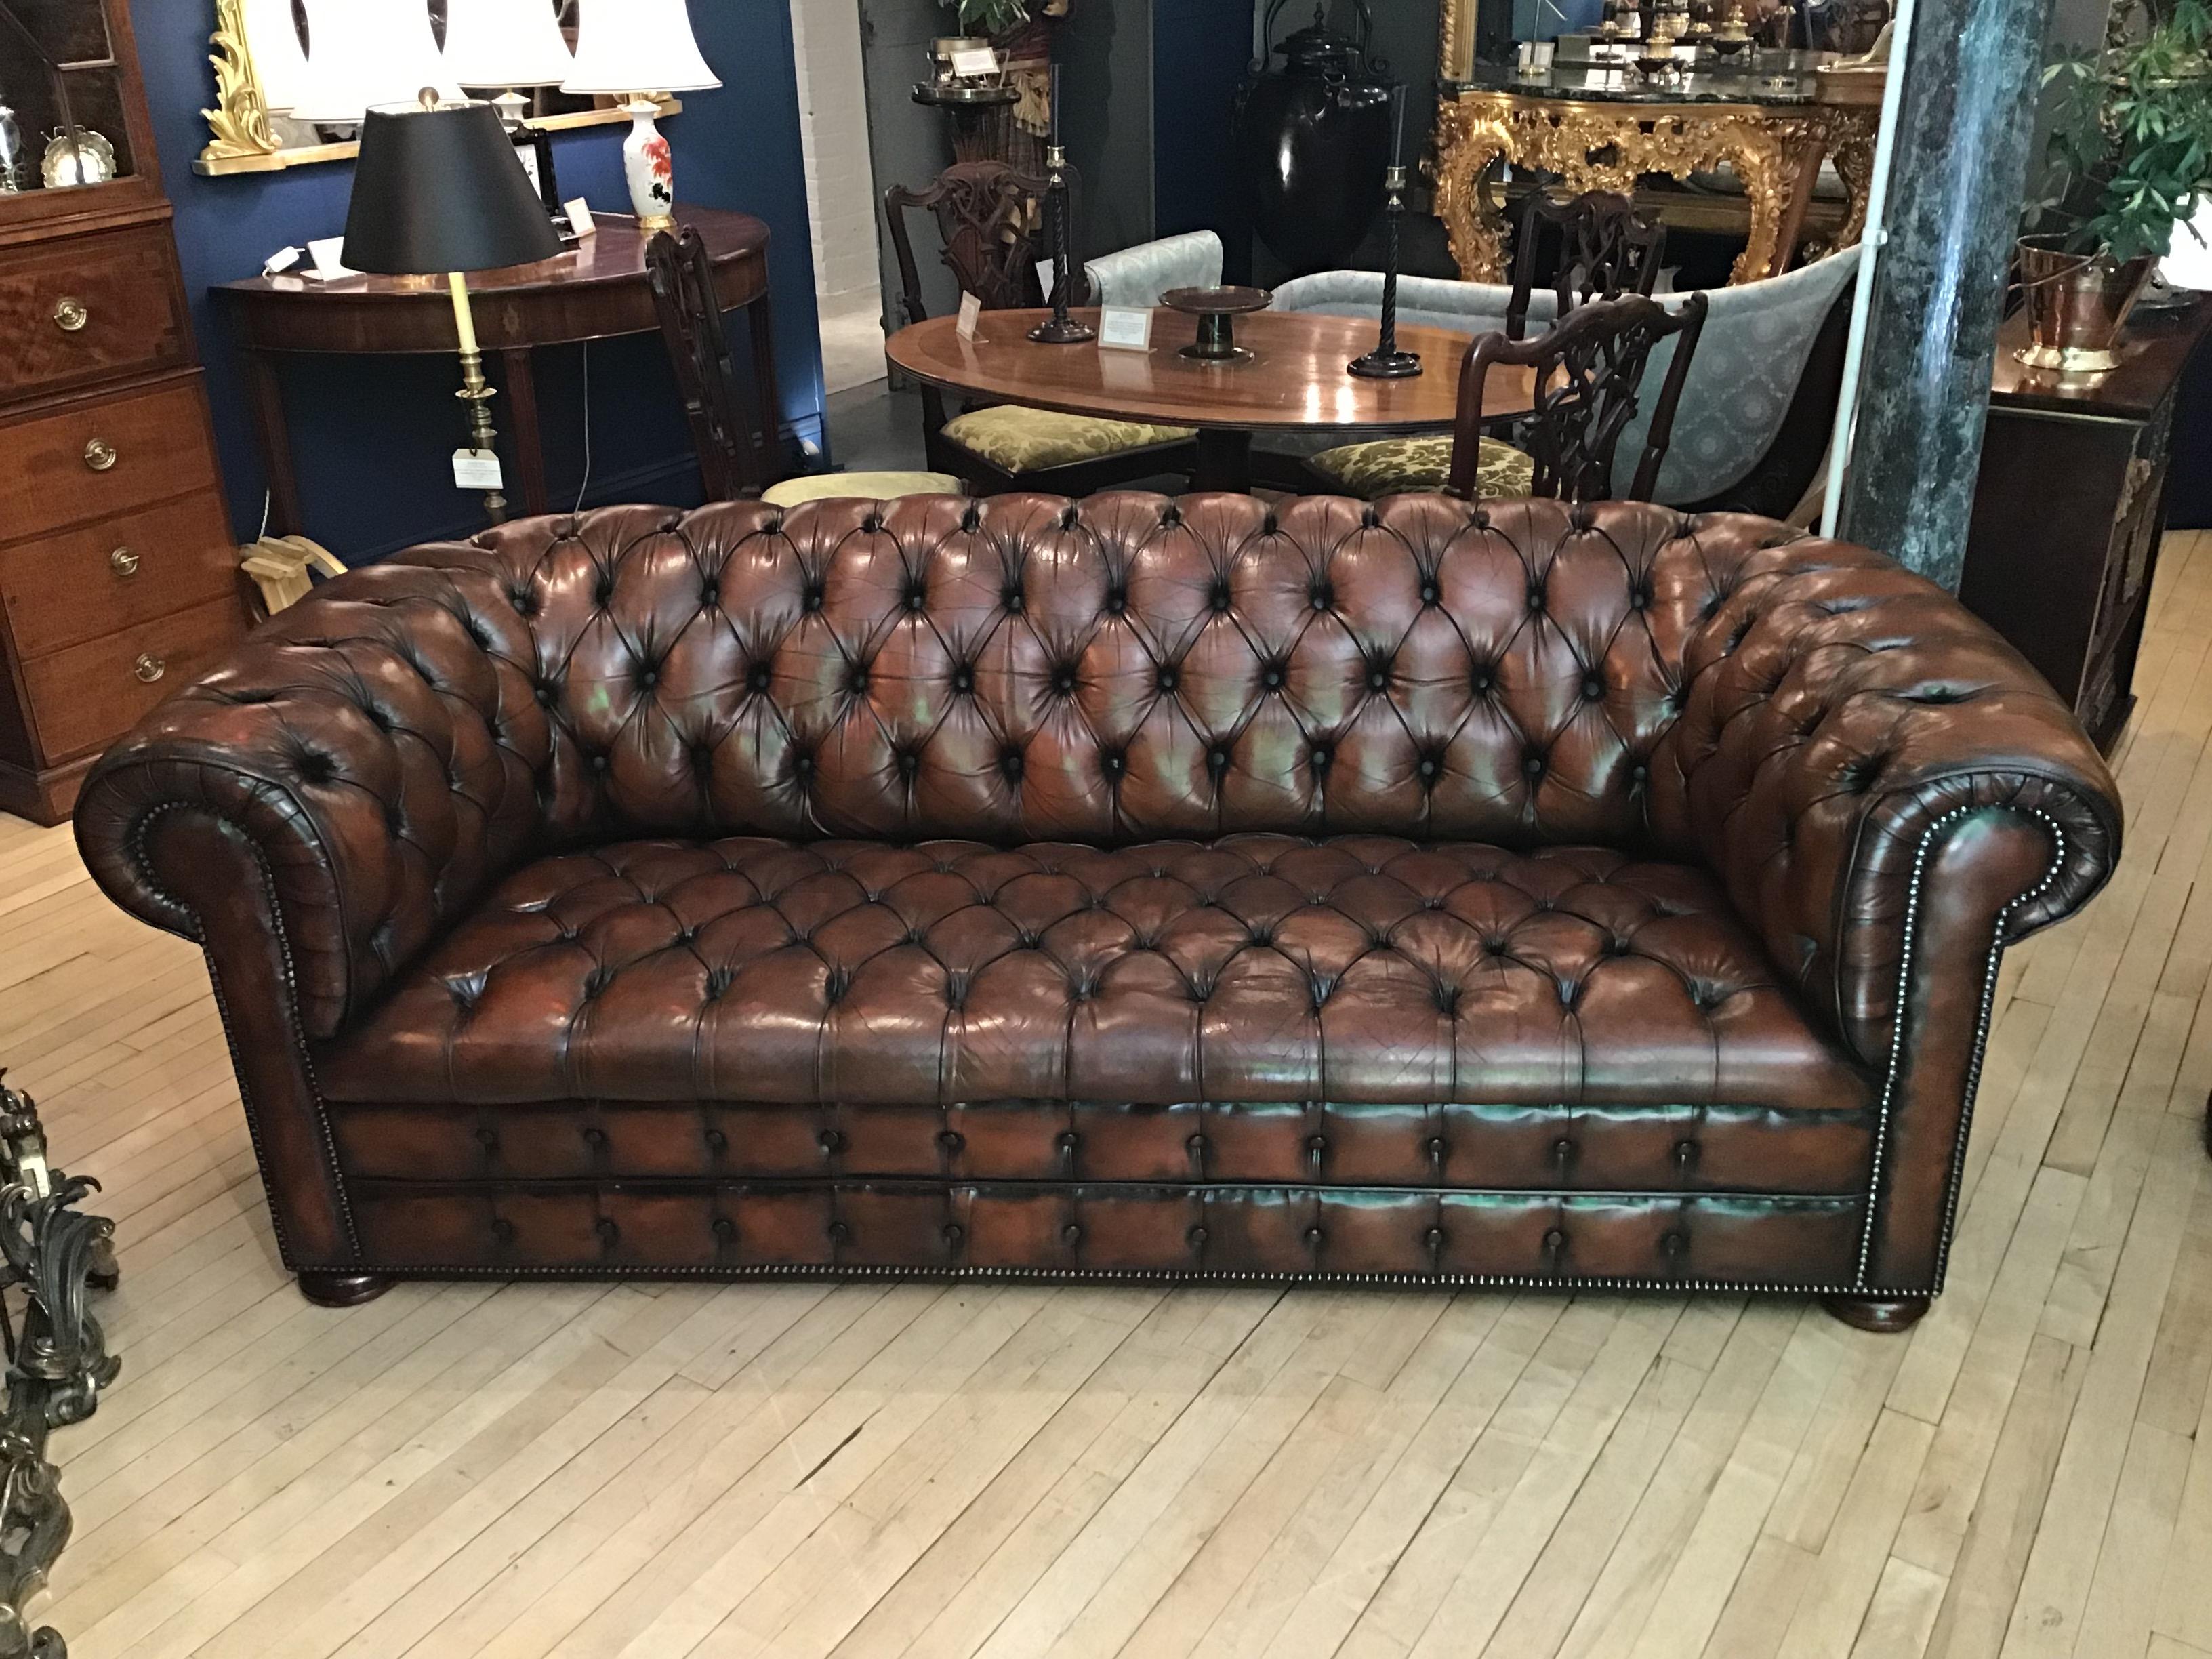 A super example of a mid-20th century brown leather Chesterfield sofa with buttoned seat and back.

The buttoned seat examples being rarer, more desirable and aesthetically pleasing than those with cushions.
Good chesterfields from this period